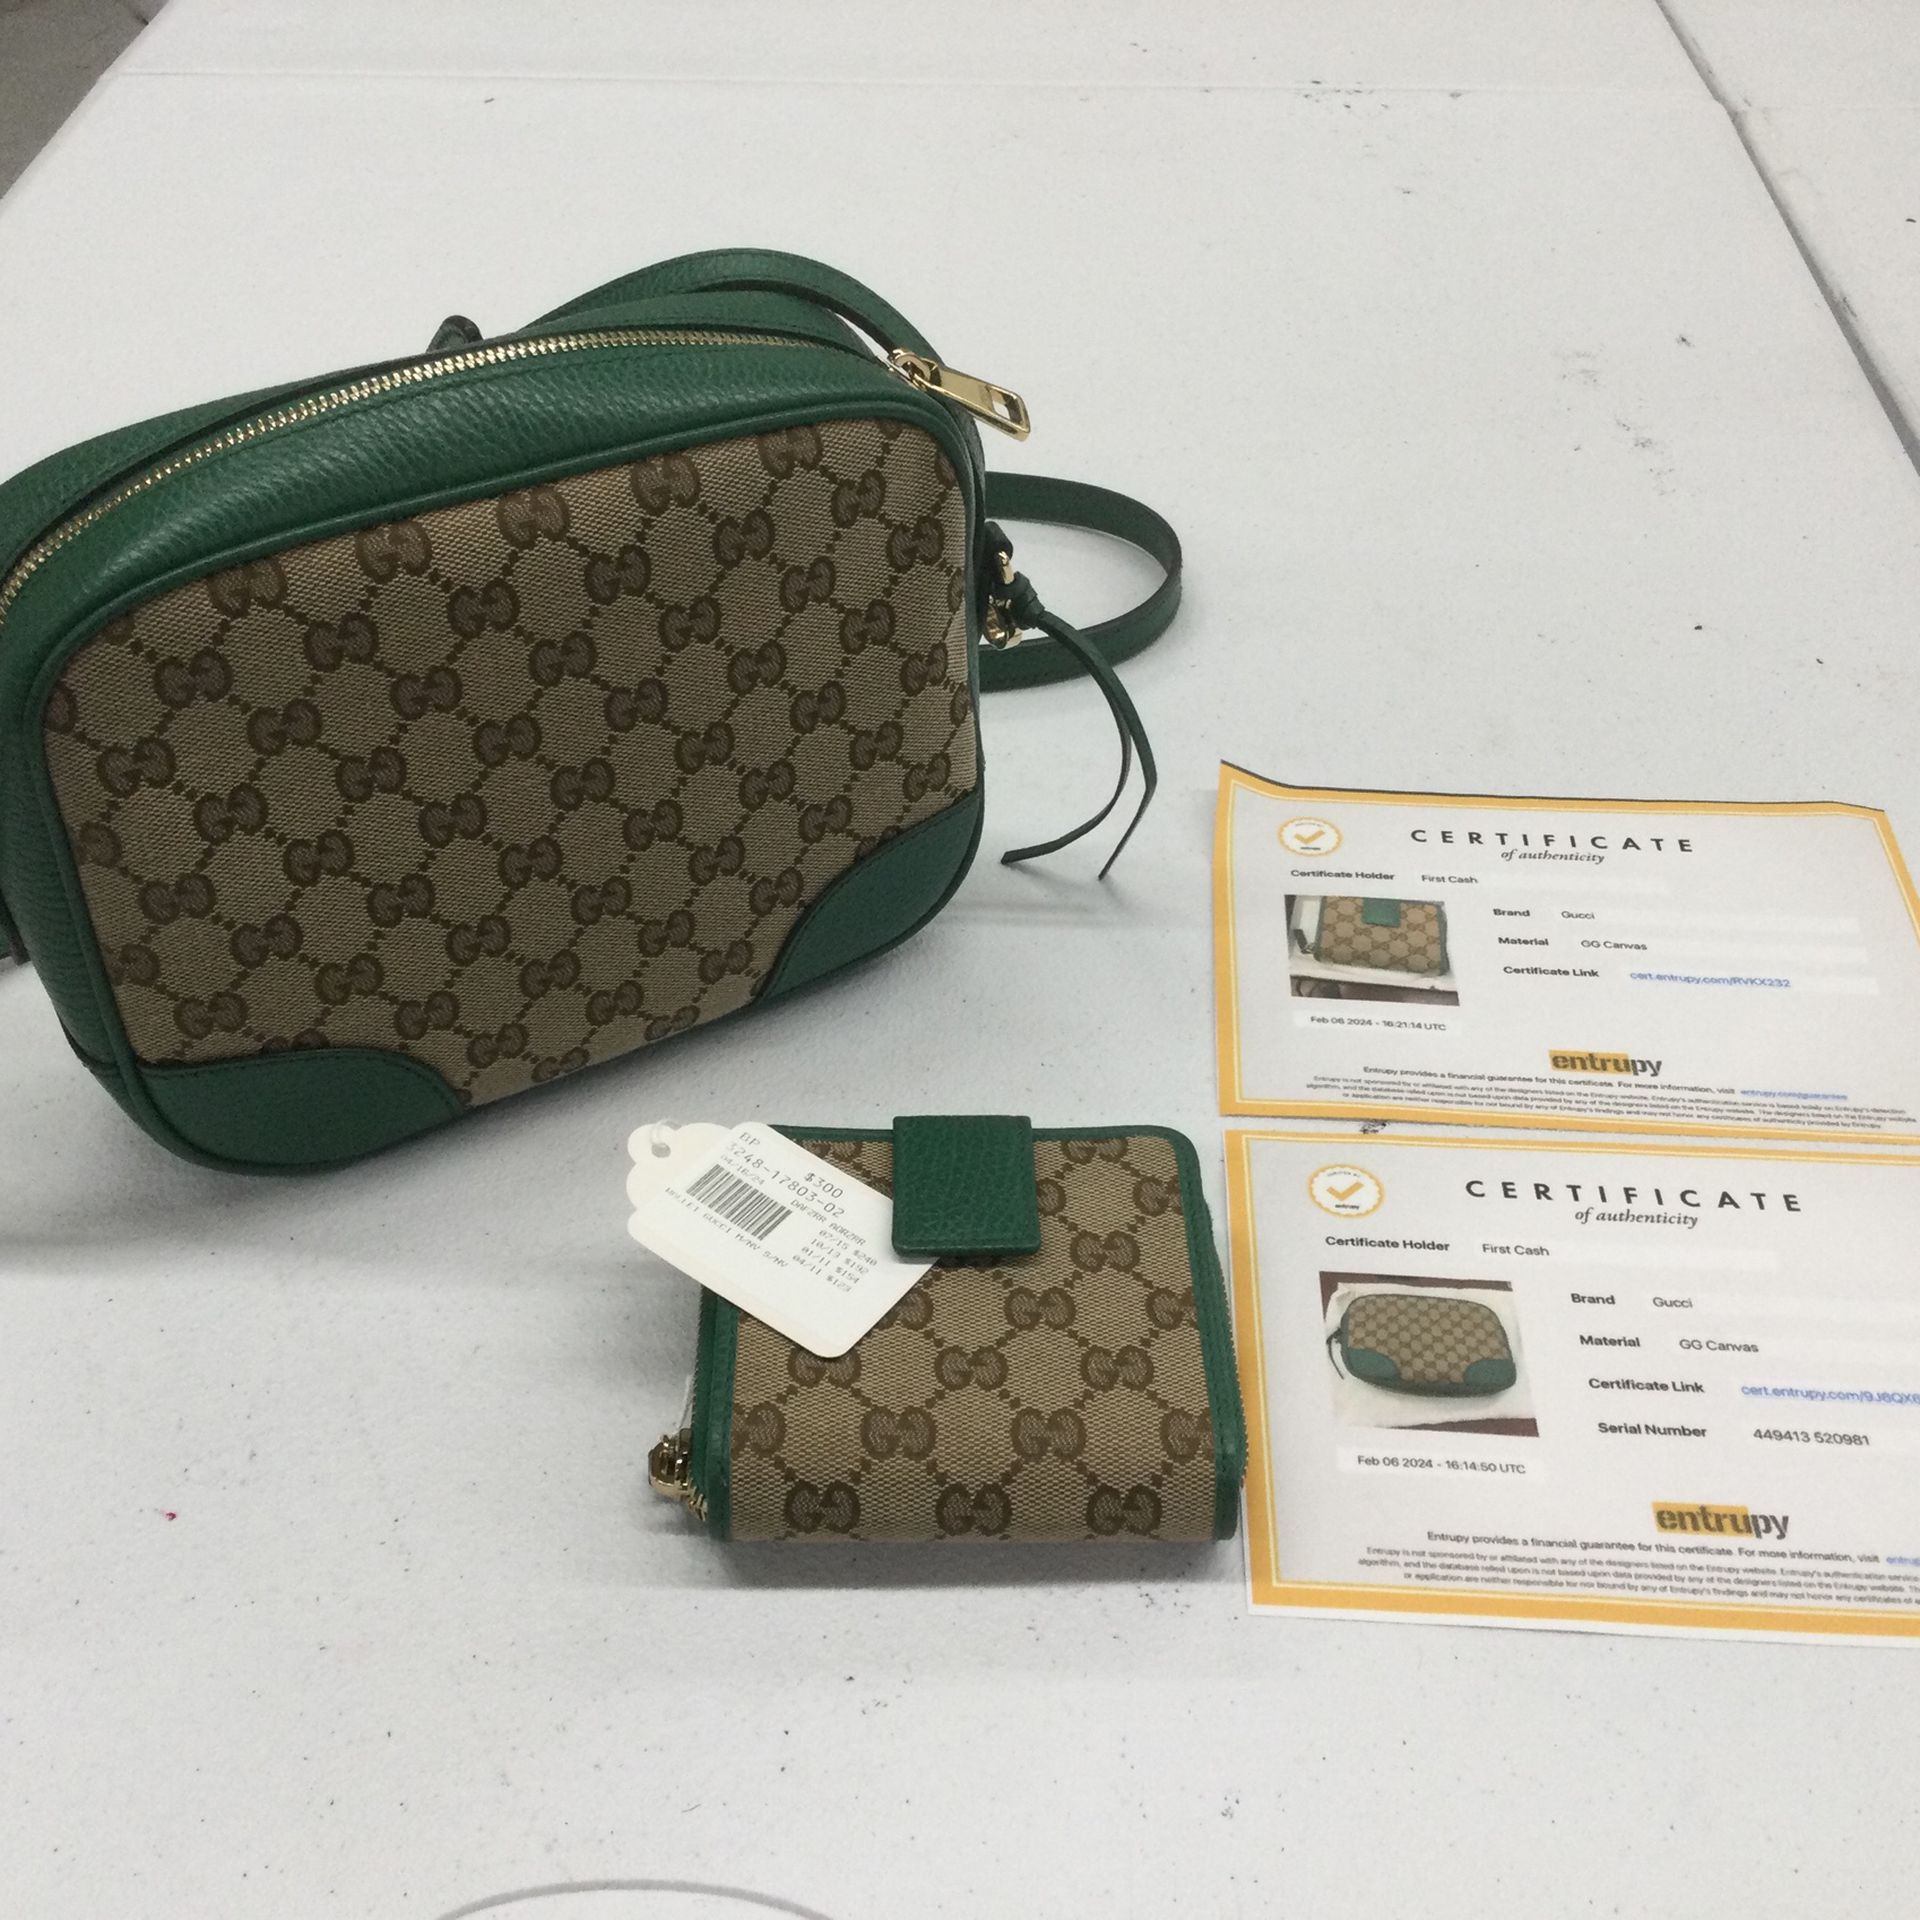 Gucci Purse And Wallet